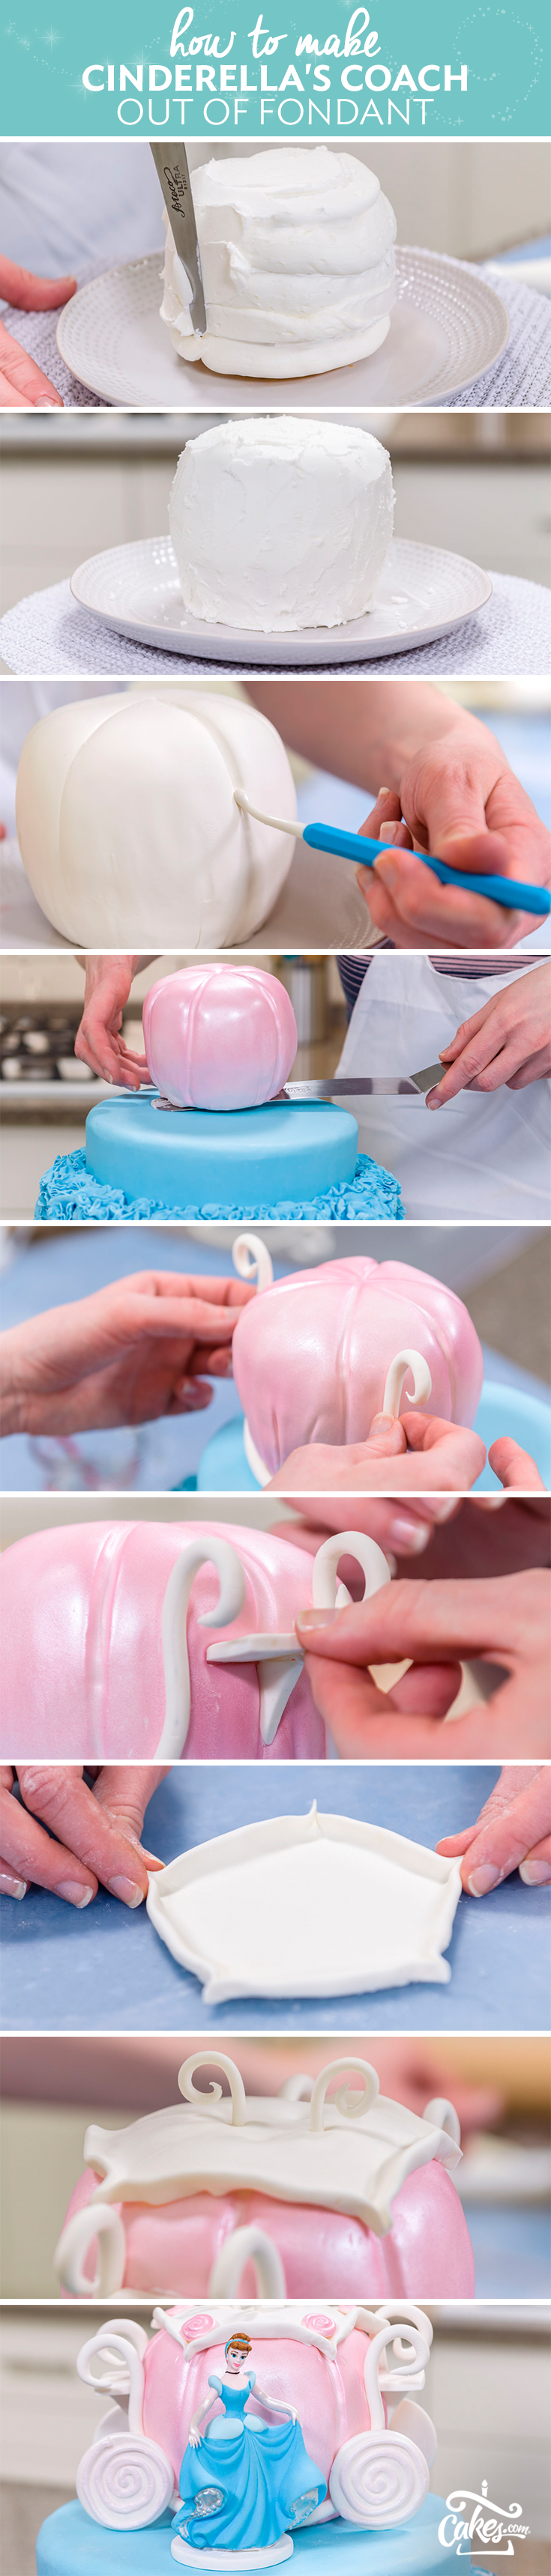 Get sculpting! Make a coach fit for Cinderella with fondant details. Beautiful design for the advanced cake decorator.